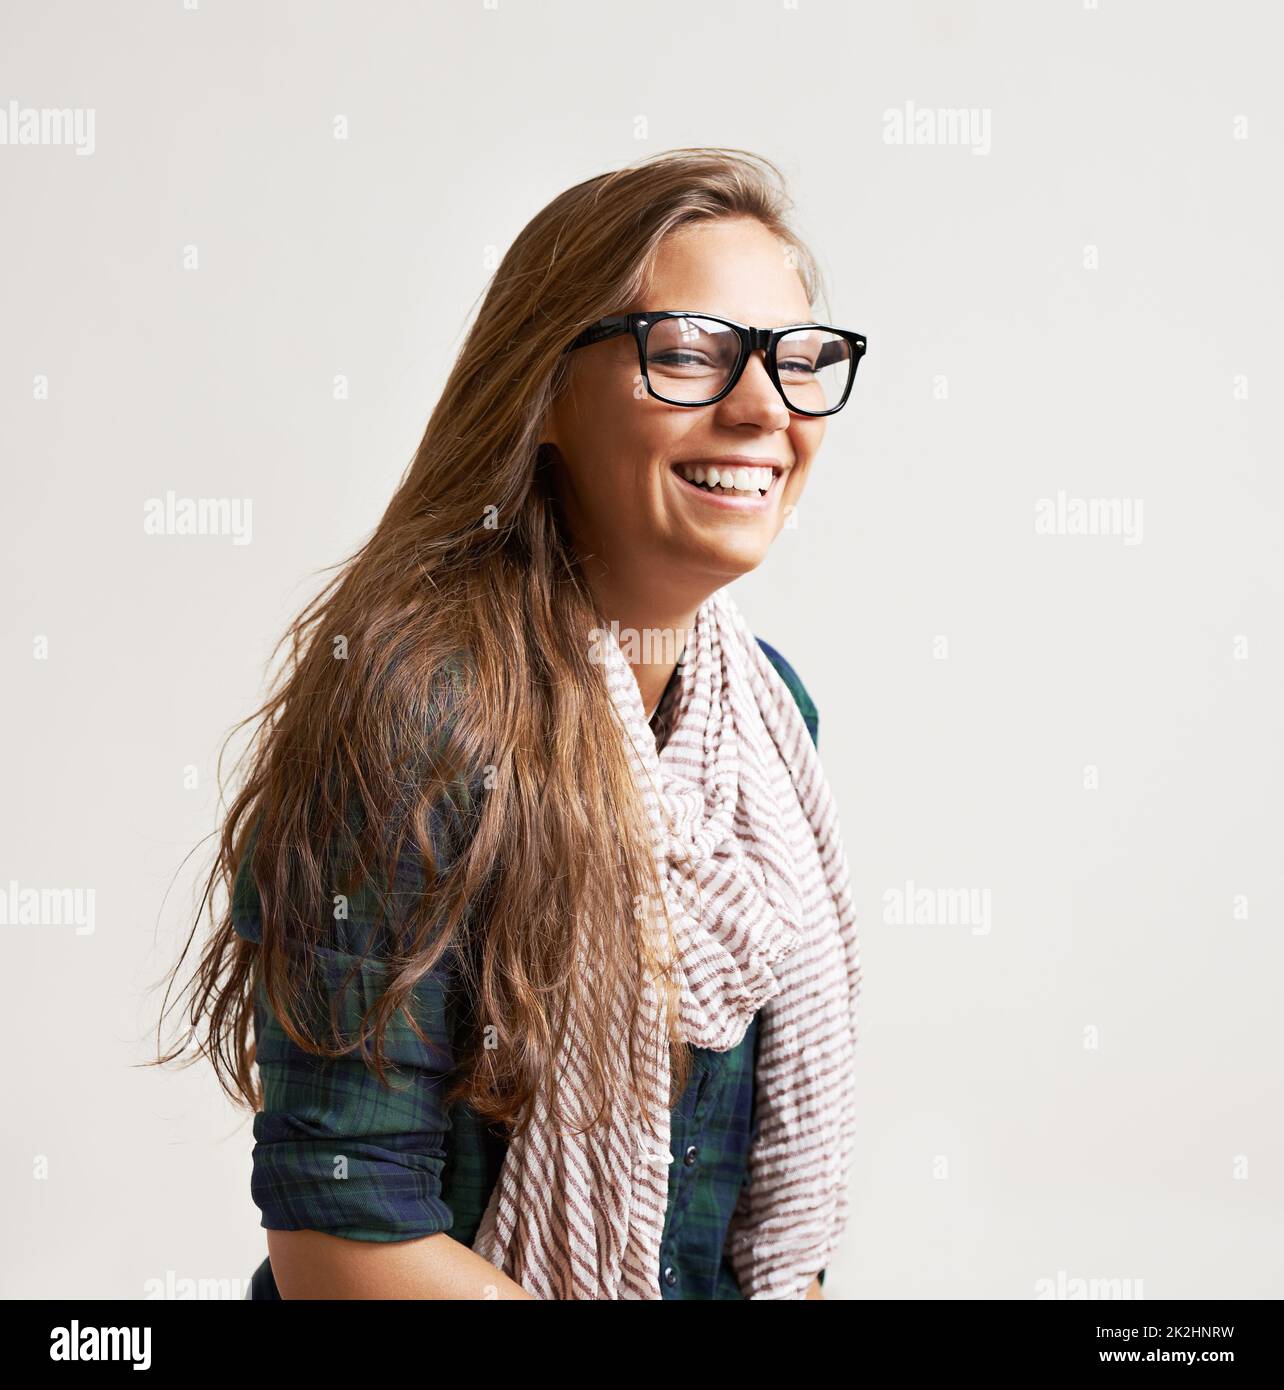 https://c8.alamy.com/comp/2K2HNRW/shes-got-the-trends-down-a-young-hipster-girl-in-studio-2K2HNRW.jpg